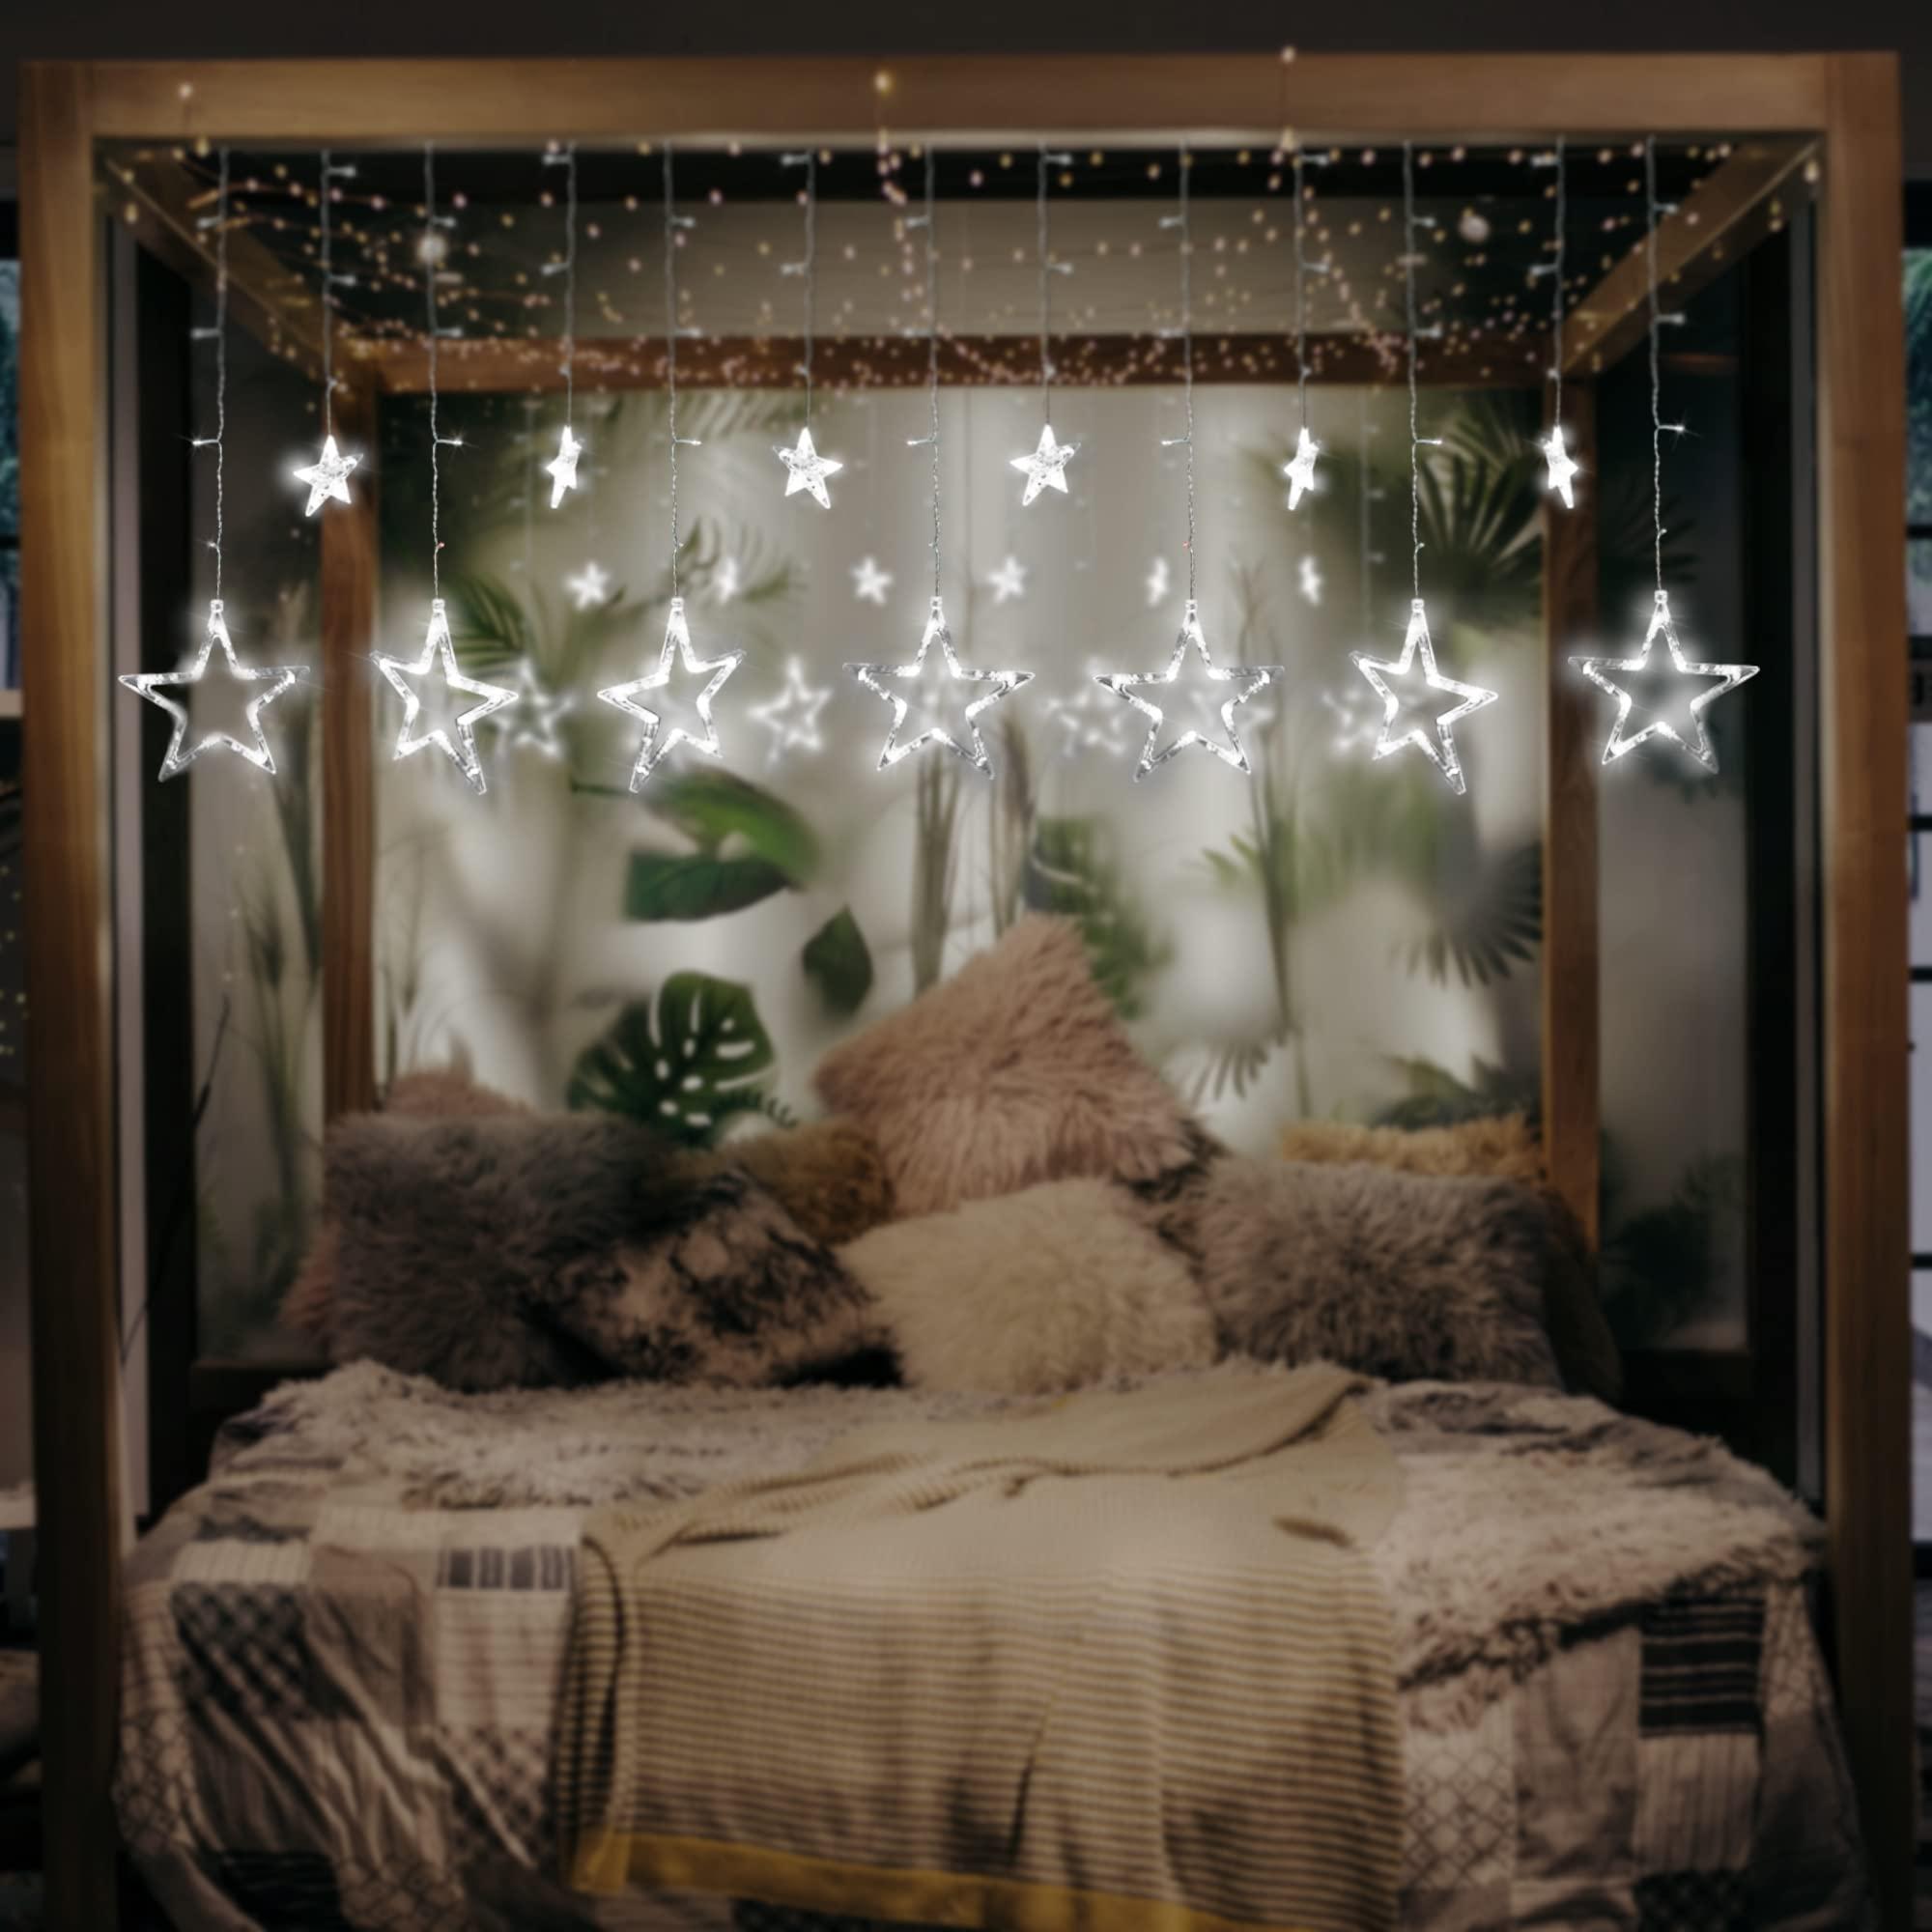 12 Star Curtain Lights with Remote Control 138 LEDs Fairy Light 8 Lighting Modes USB Powered for Bedroom Garden Party Wedding Christmas, Ideale Gift for Family Friends (Cold White) 3